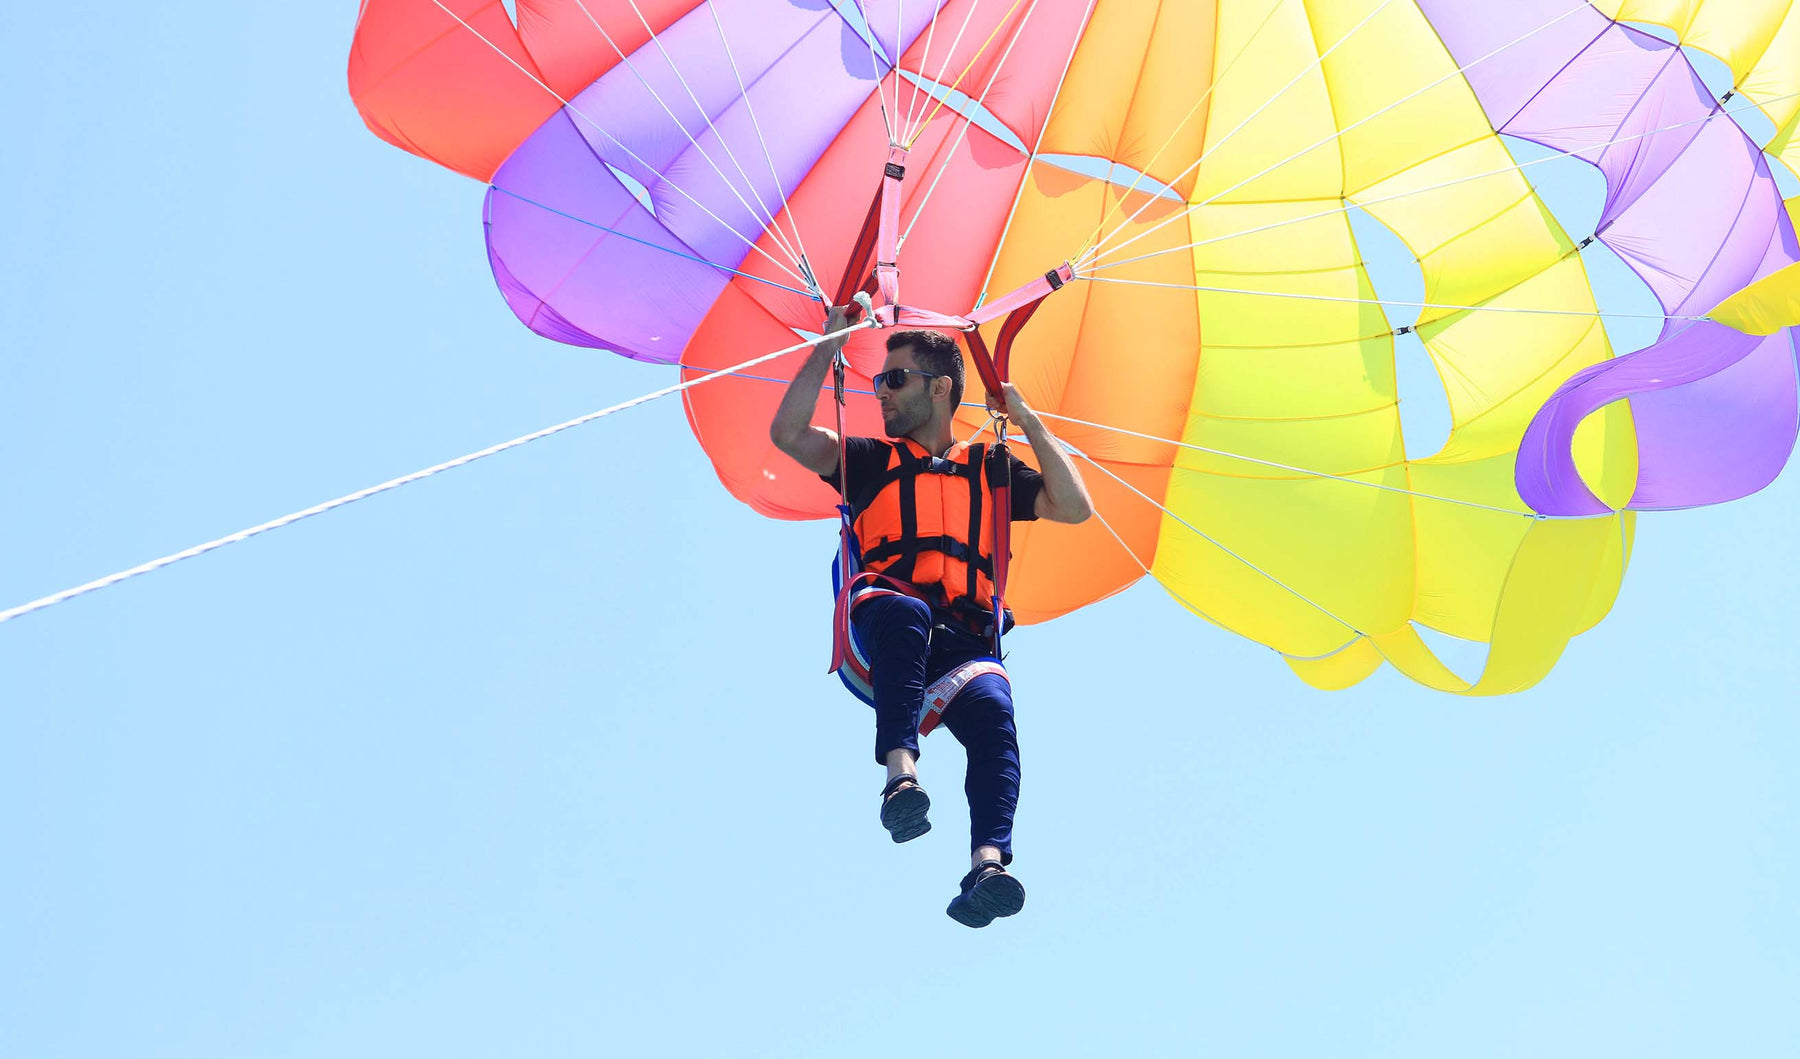 Where is the Best Place to Parasail in Abu Dhabi?